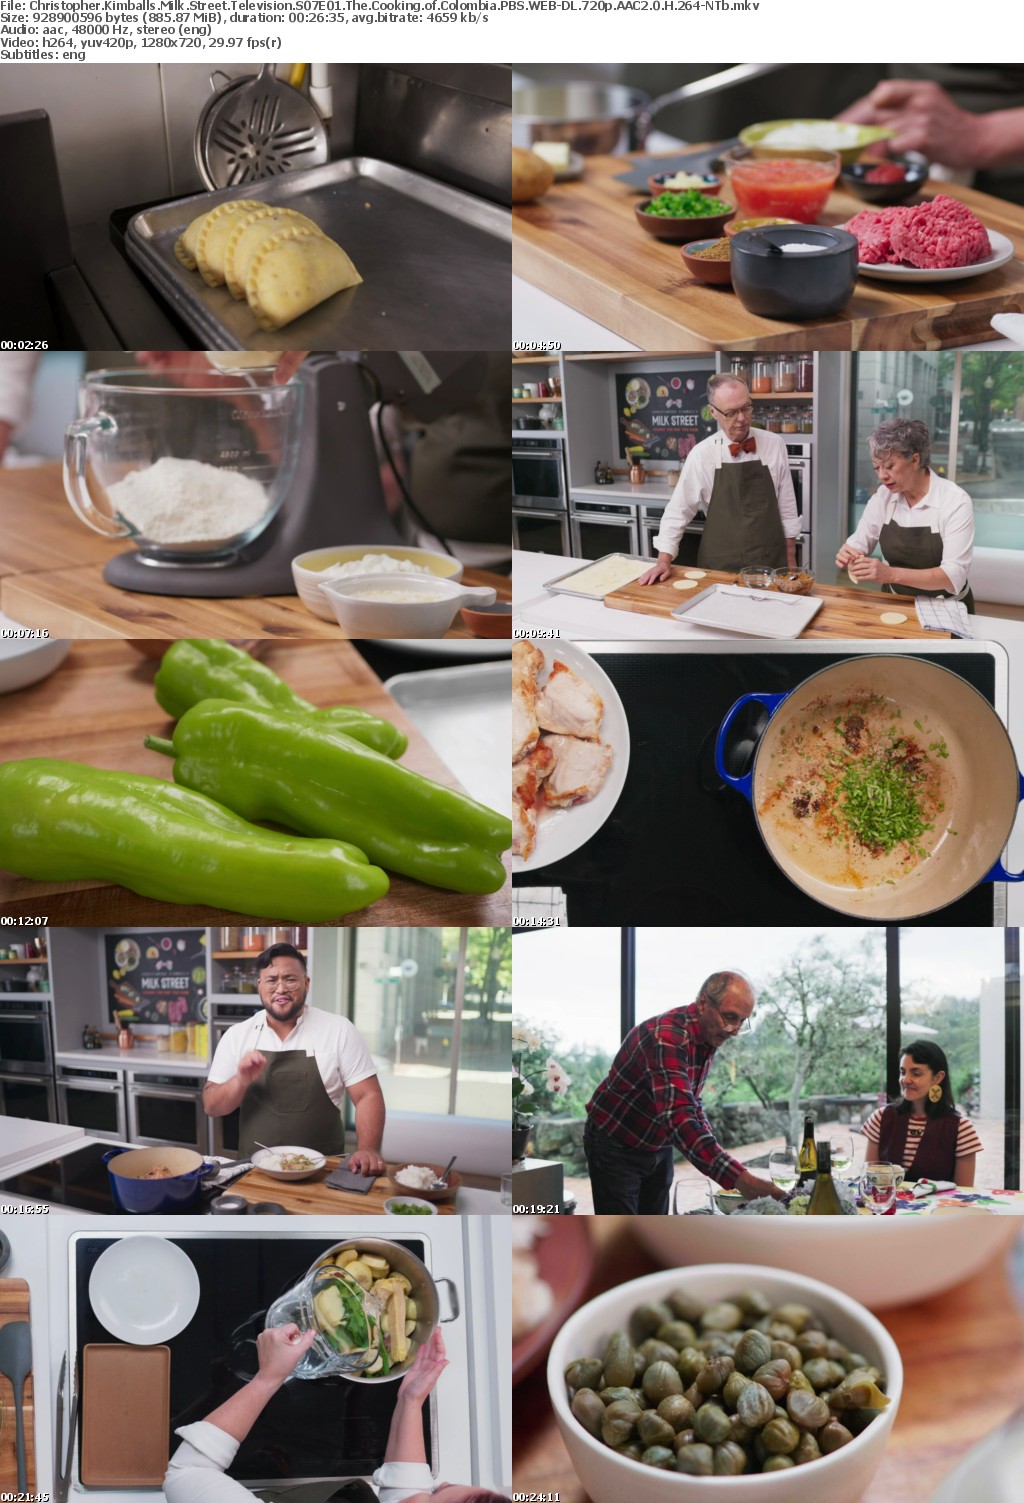 Christopher Kimballs Milk Street Television S07E01 The Cooking of Colombia PBS WEB-DL 720p AAC2 0 H 264-NTb